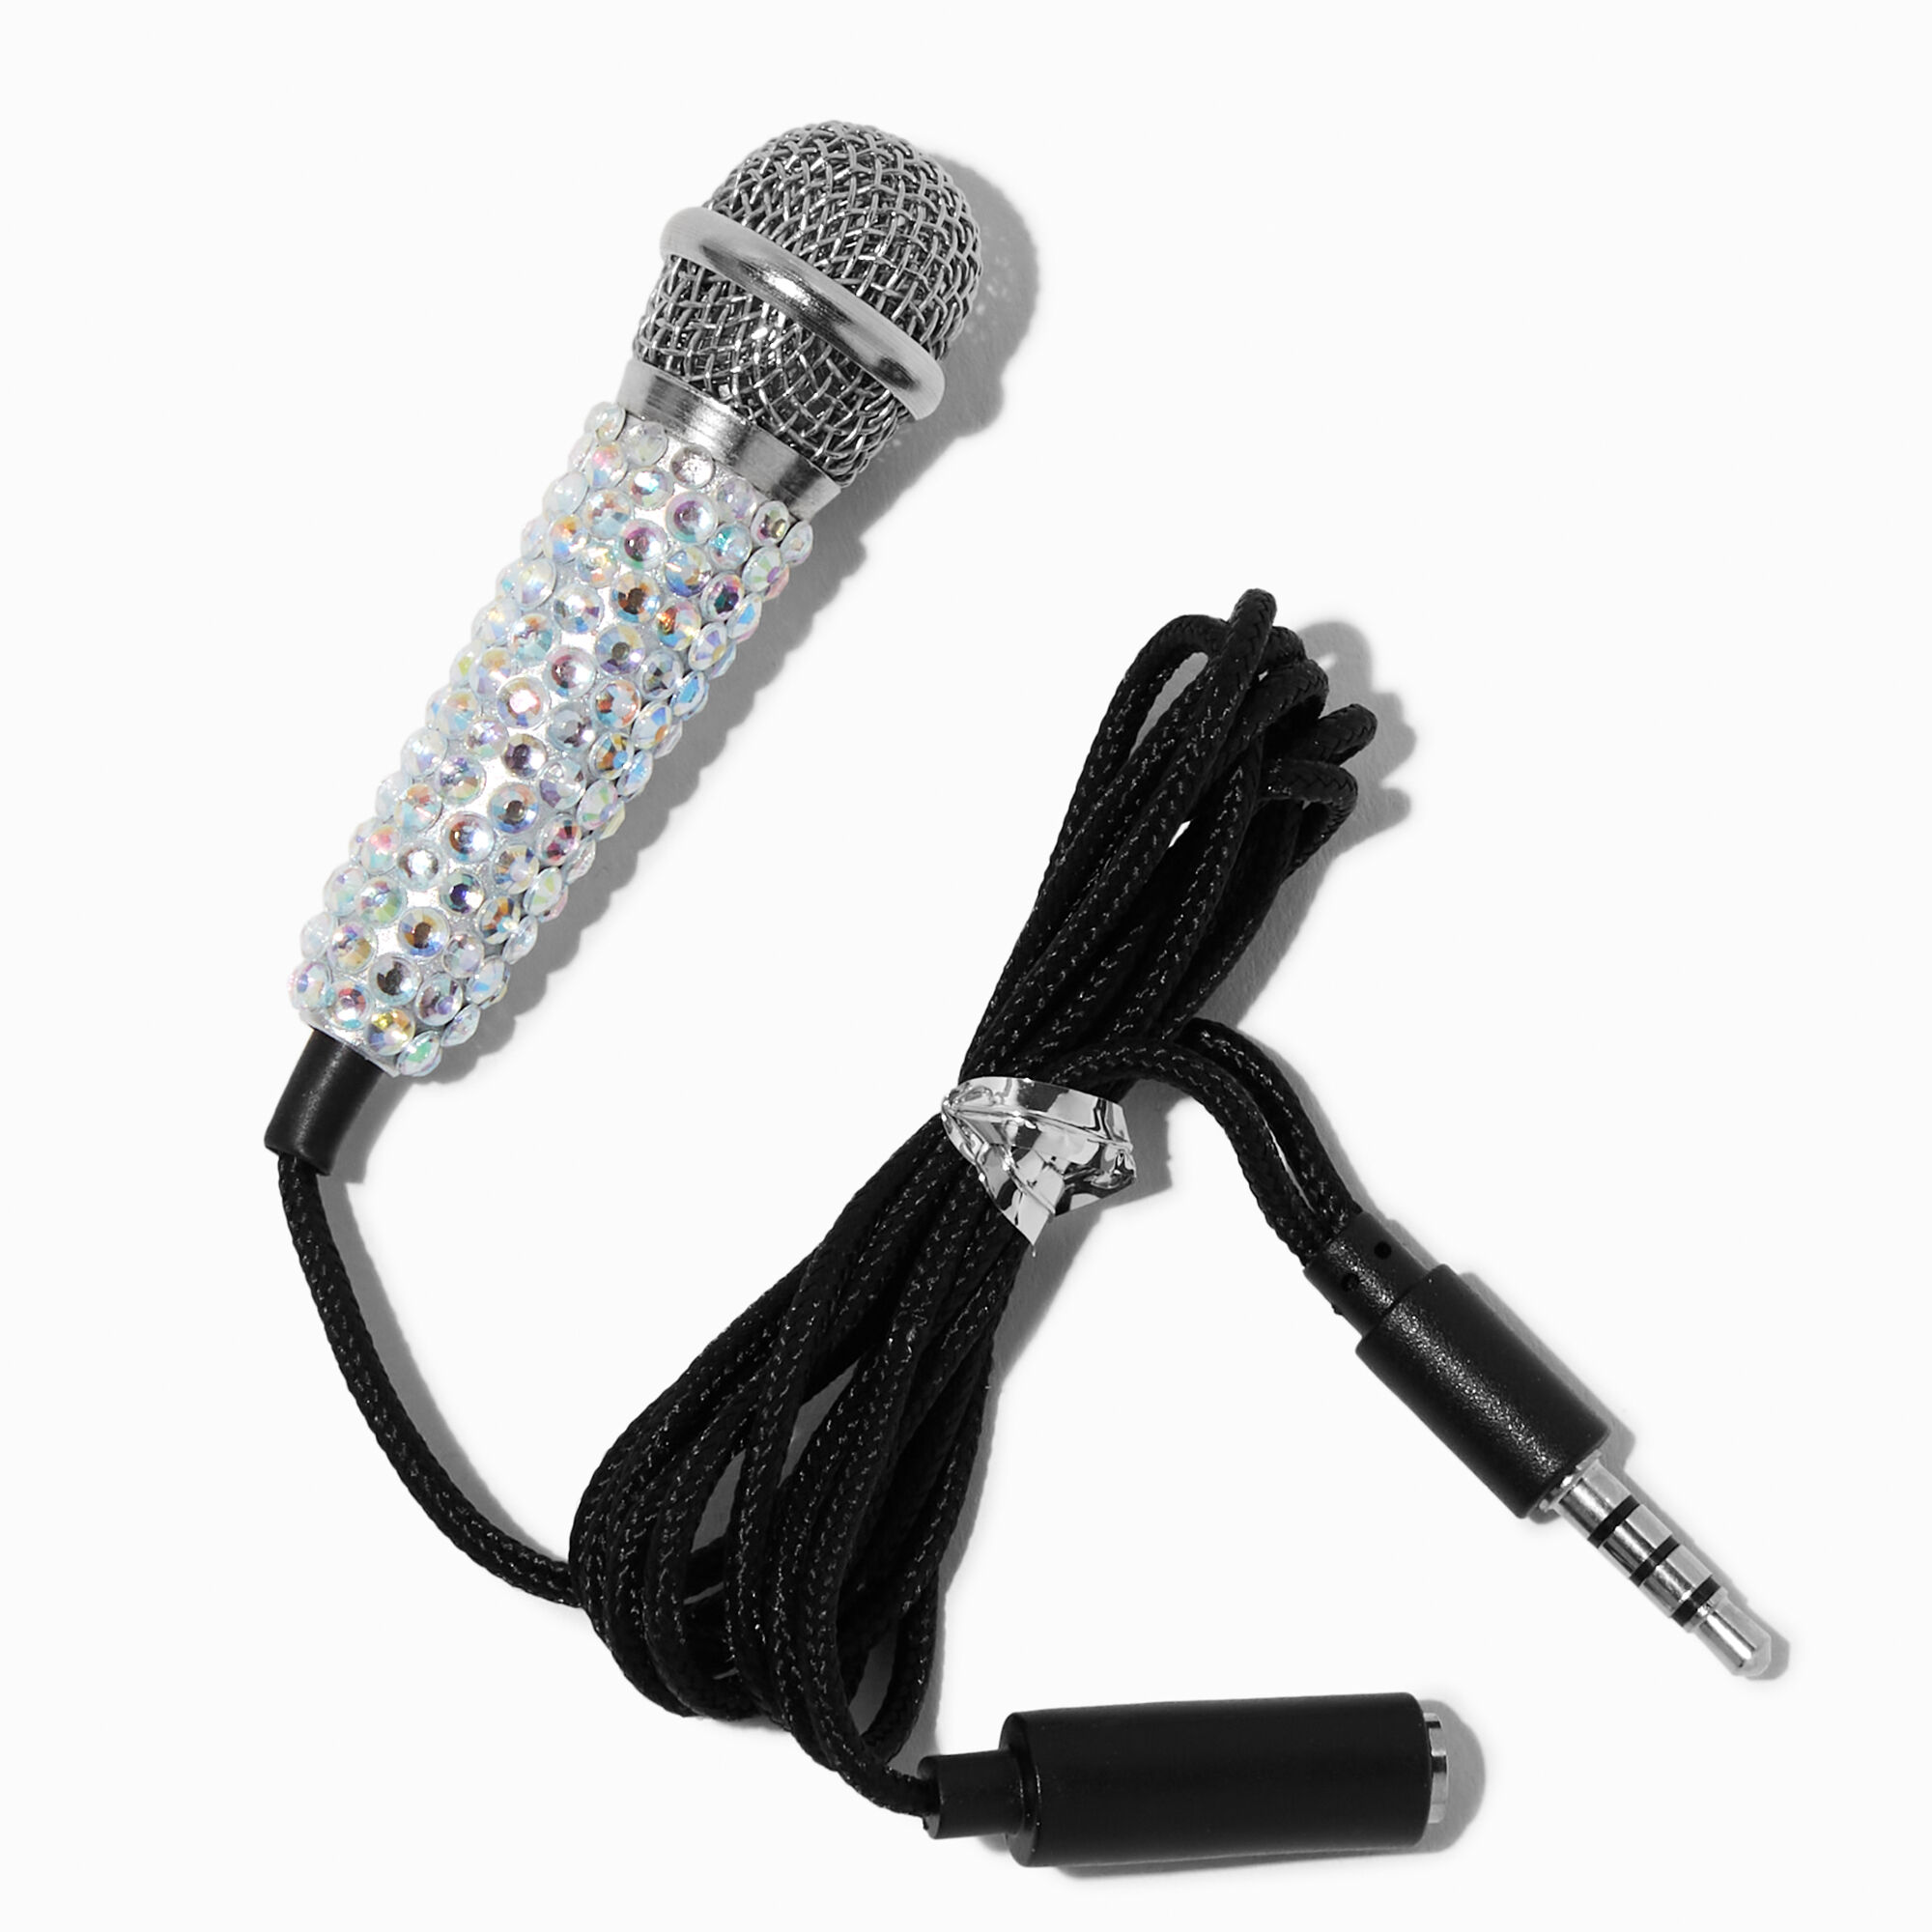 View Claires Mini Microphone Iridescent Crystal information